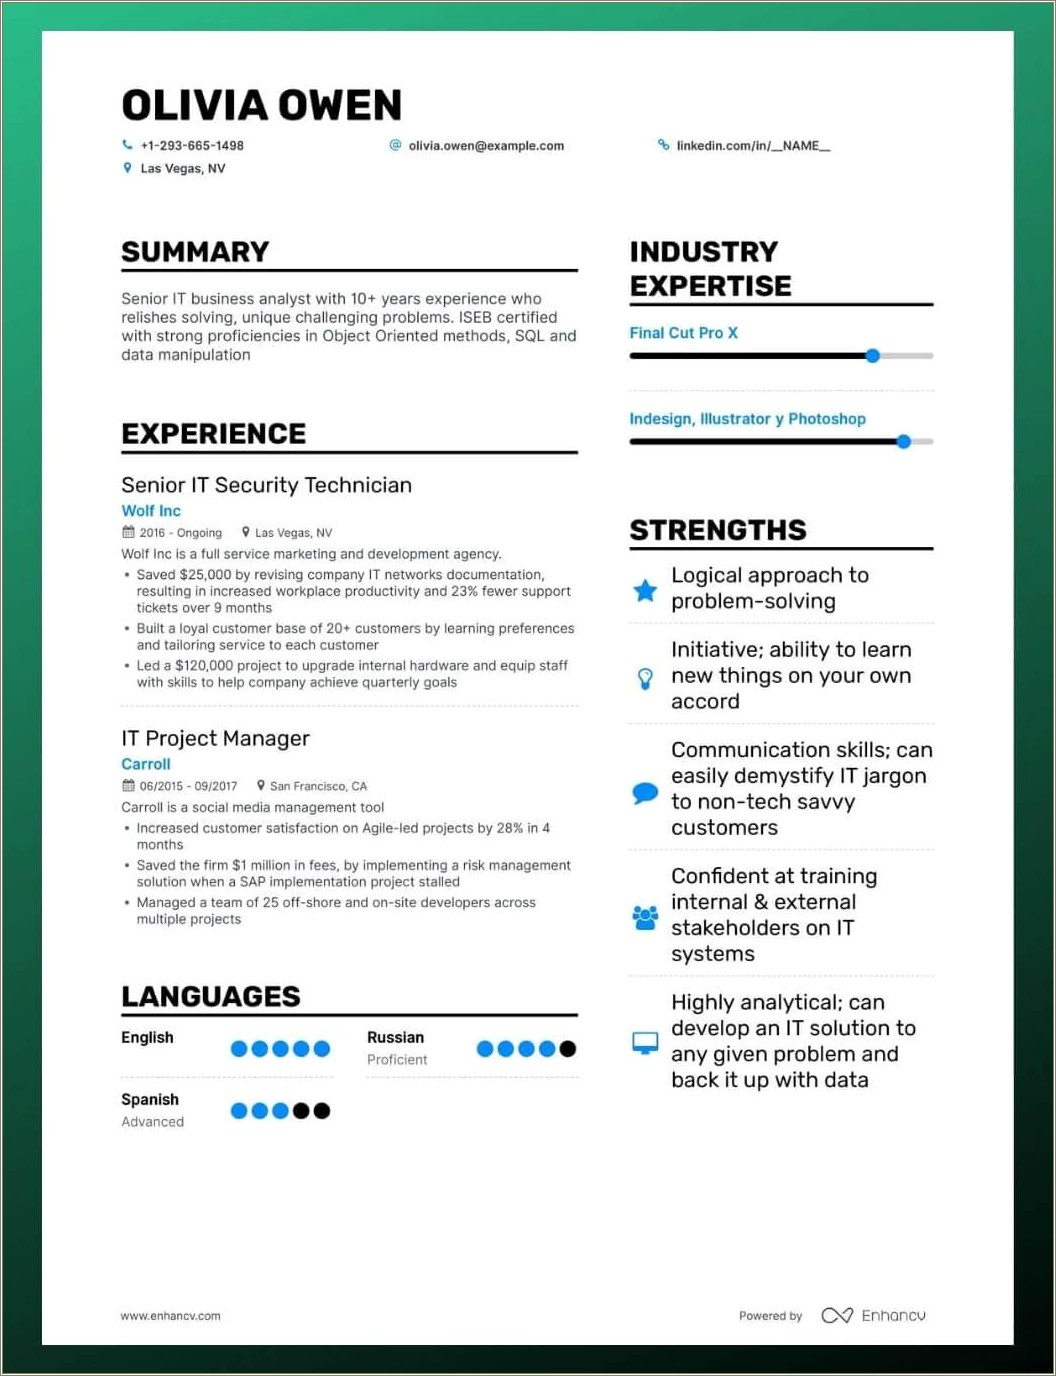 Examples Of Qualifications To Put On A Resume